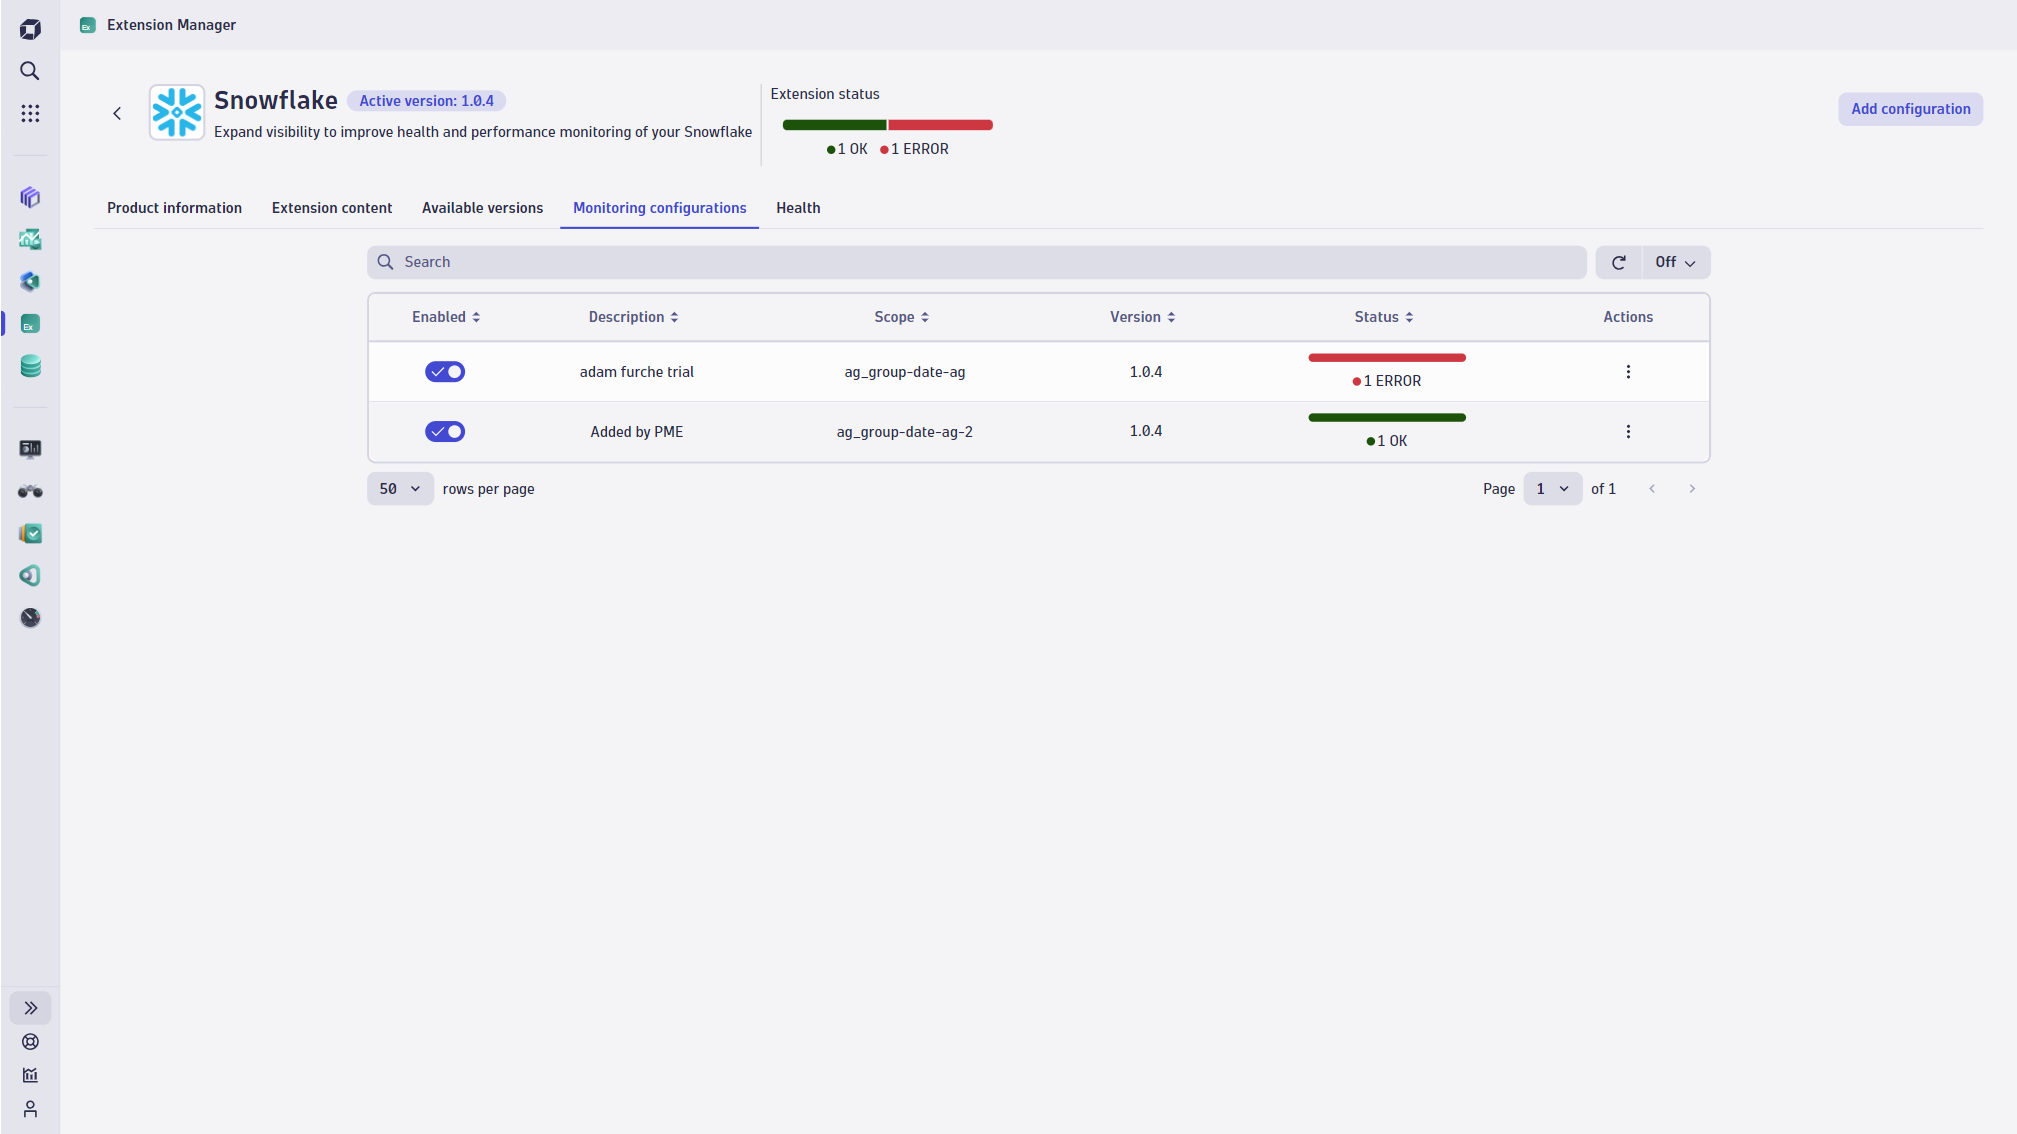 The Monitoring configurations tab lists the configurations that are available for each extension. Includes the extension version used by each configuration and the status of each configuration.